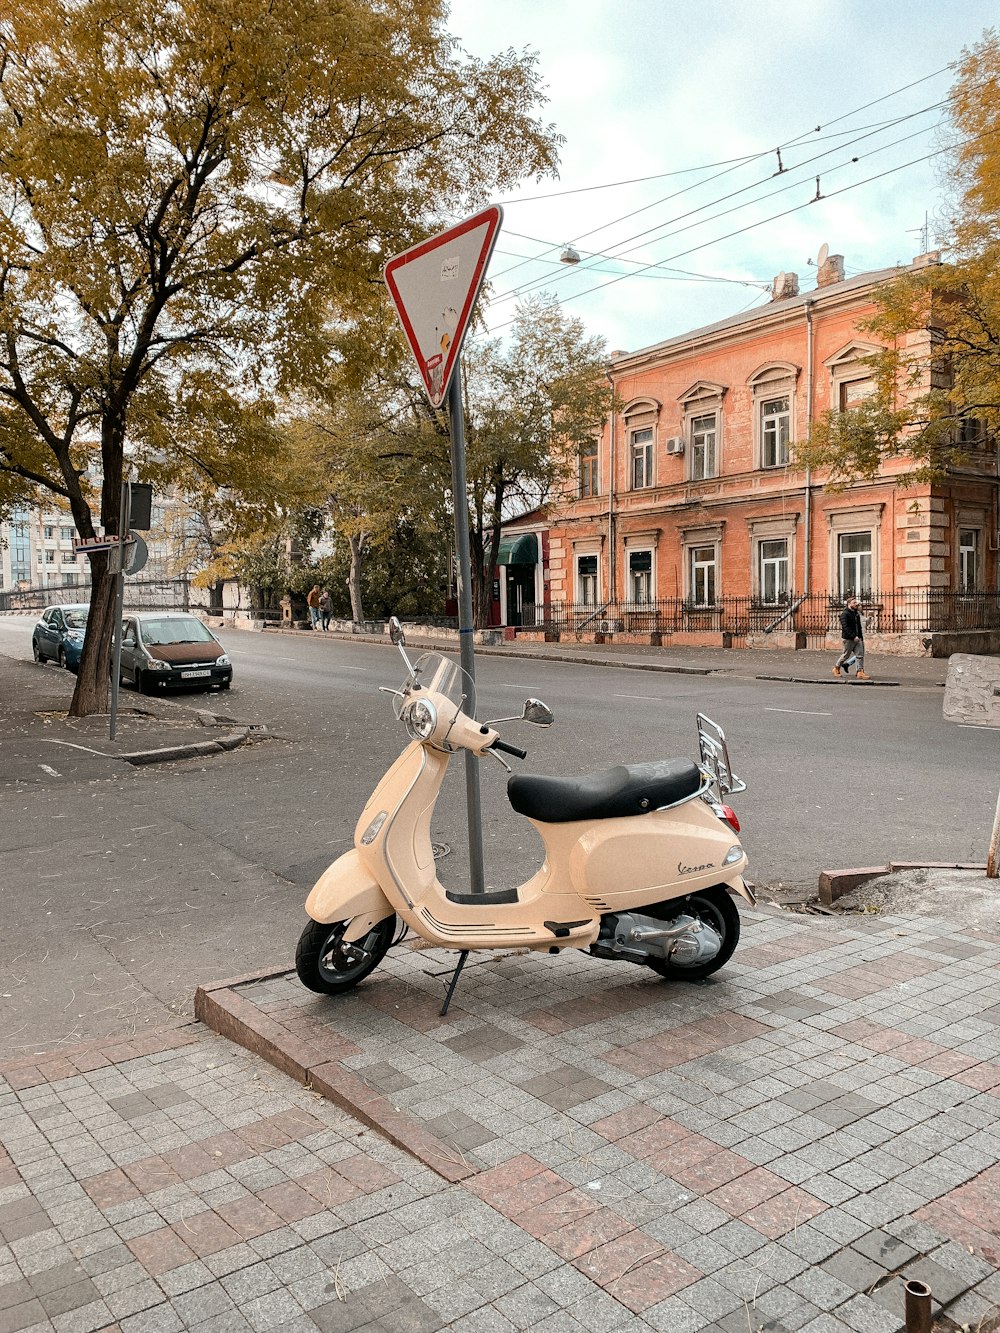 beige motor scooter parked near bare trees during daytime